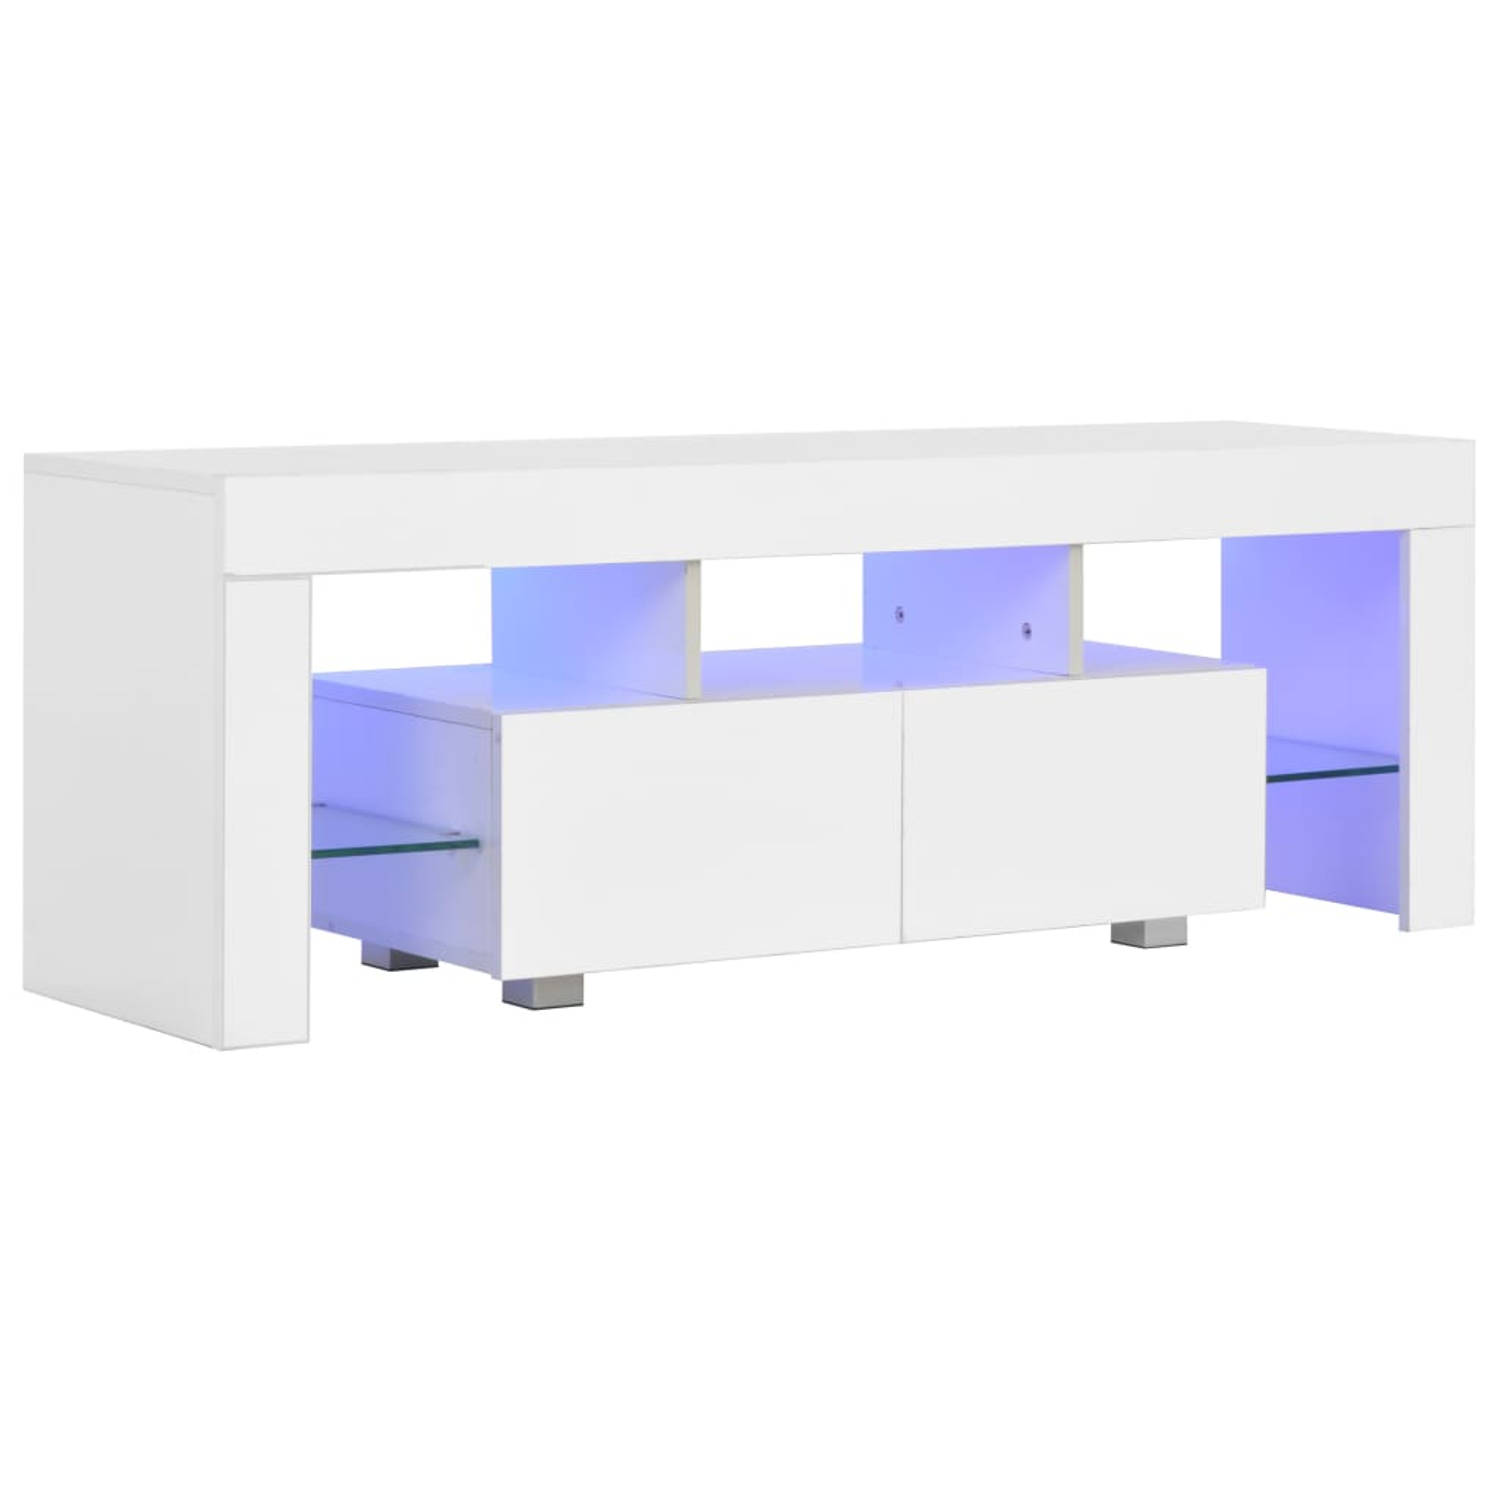 The Living Store TV-kast - wit - 130 x 35 x 45 cm - LED-verlichting